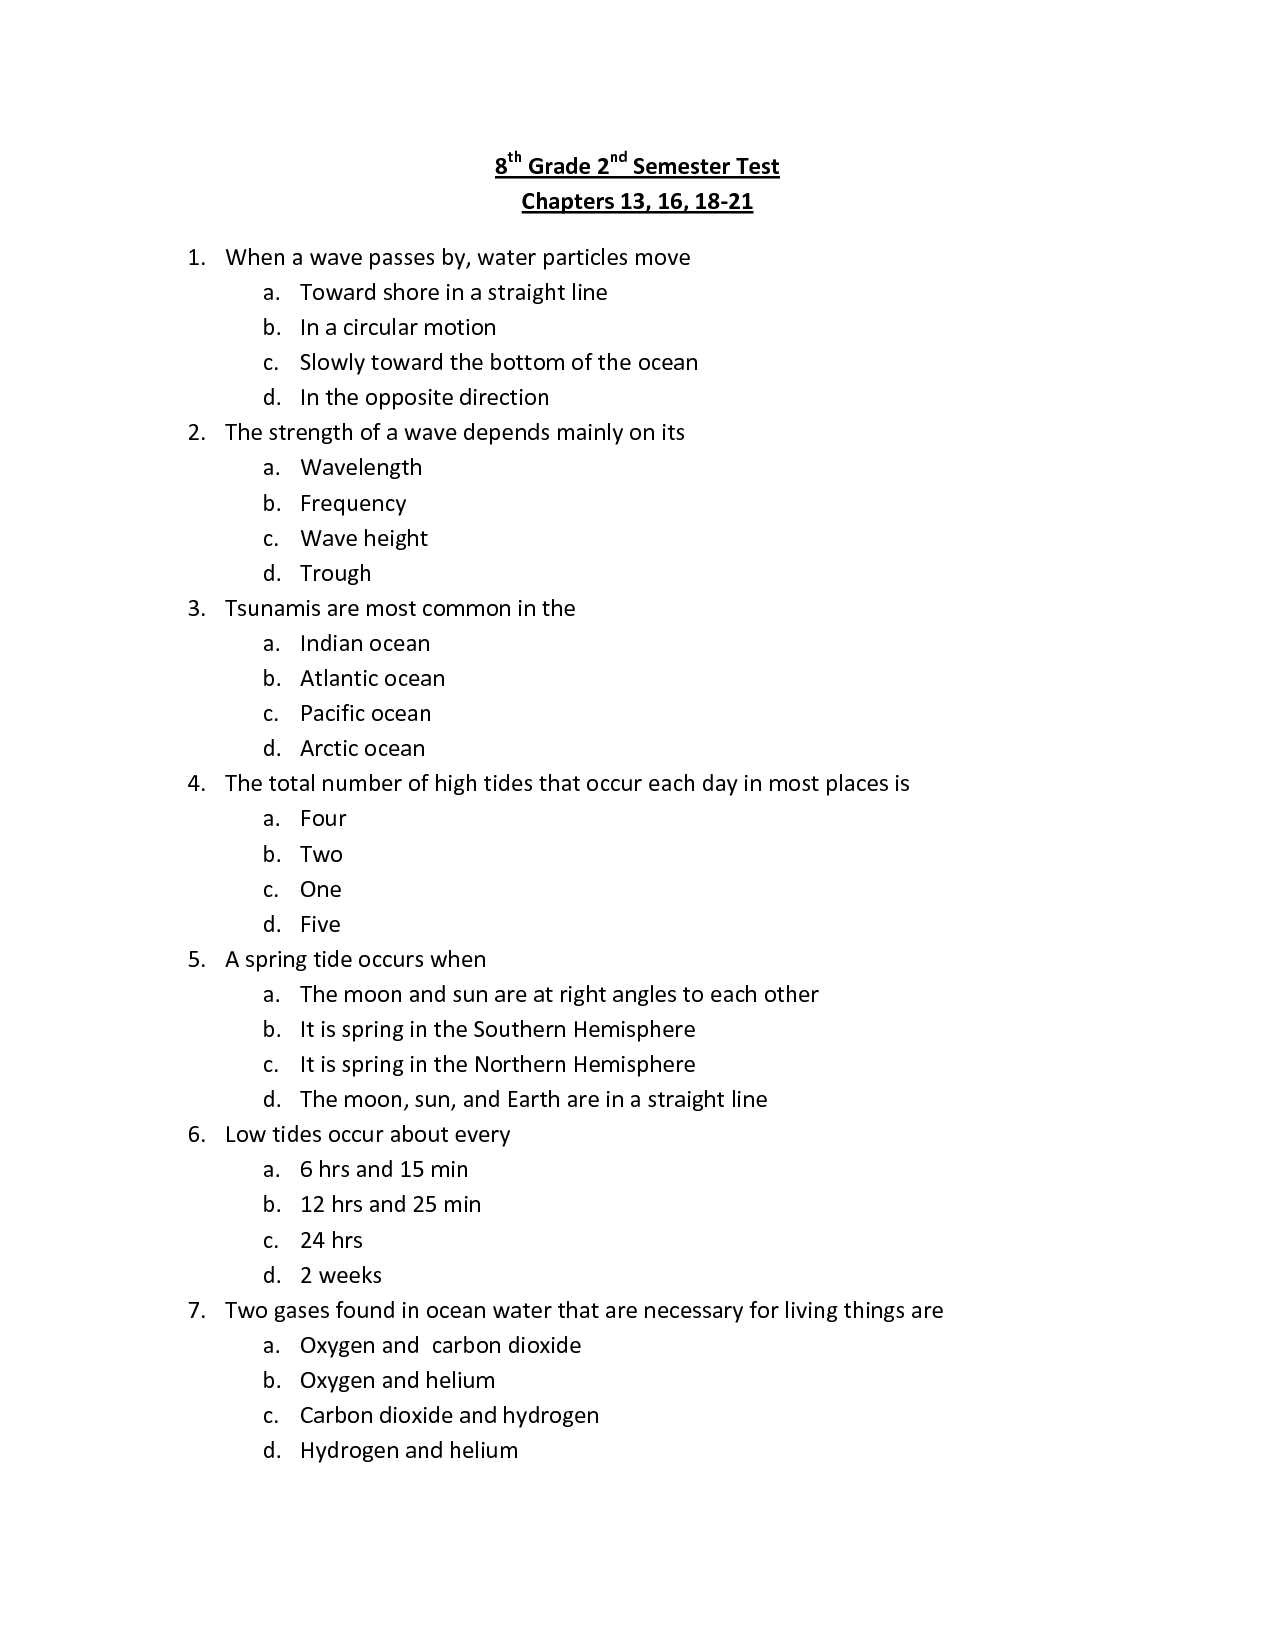 16-best-images-of-8th-grade-history-worksheets-printable-8th-grade